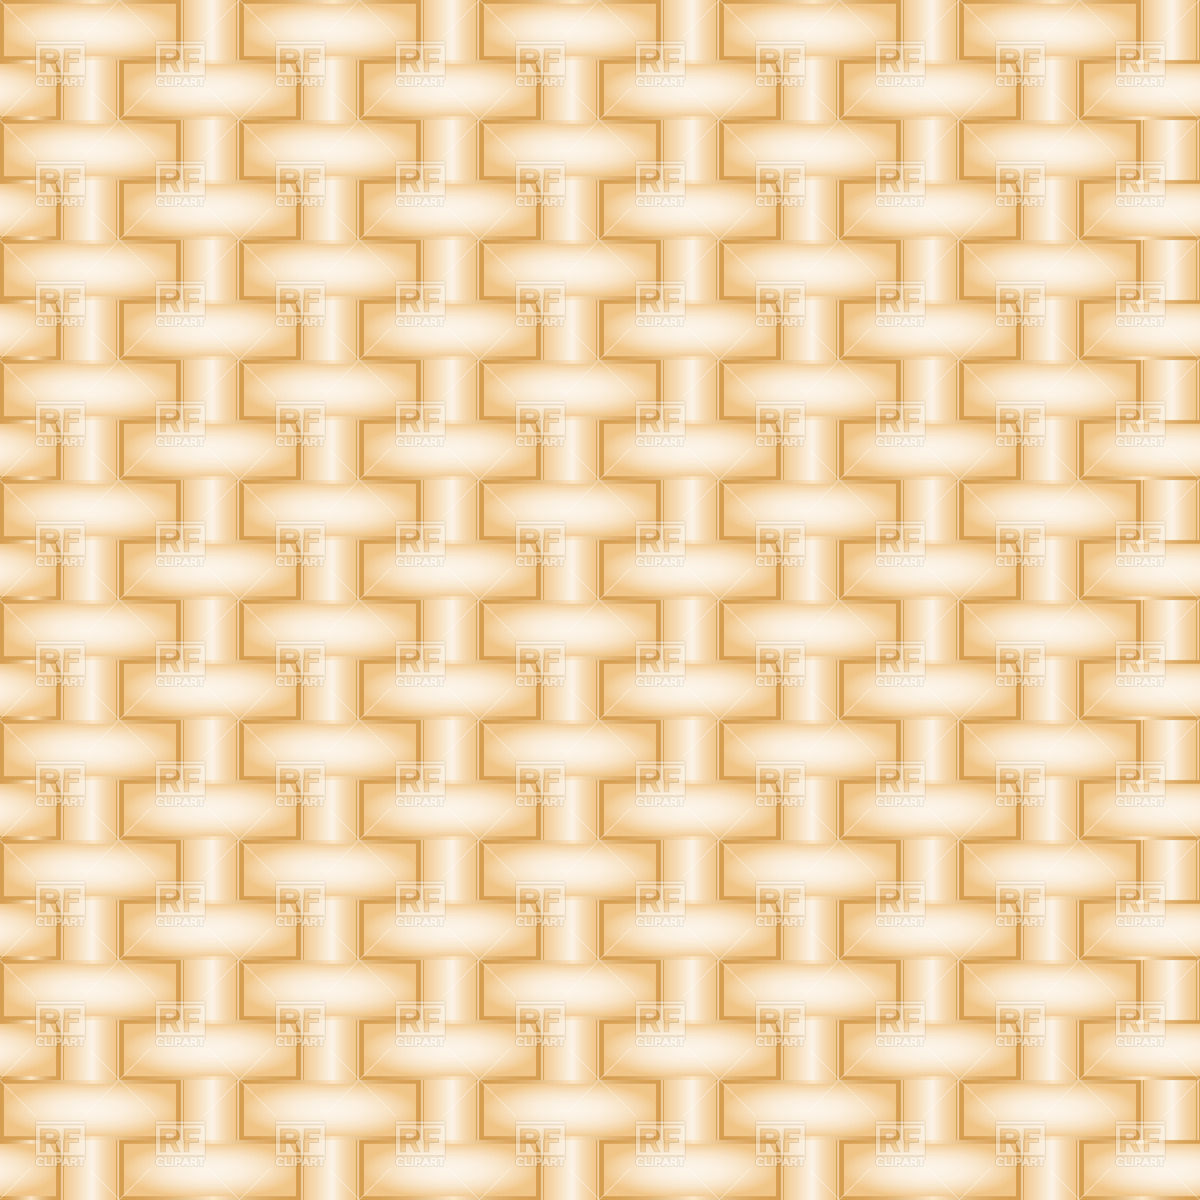 Abstract seamless weaving pattern Vector Image #33631.